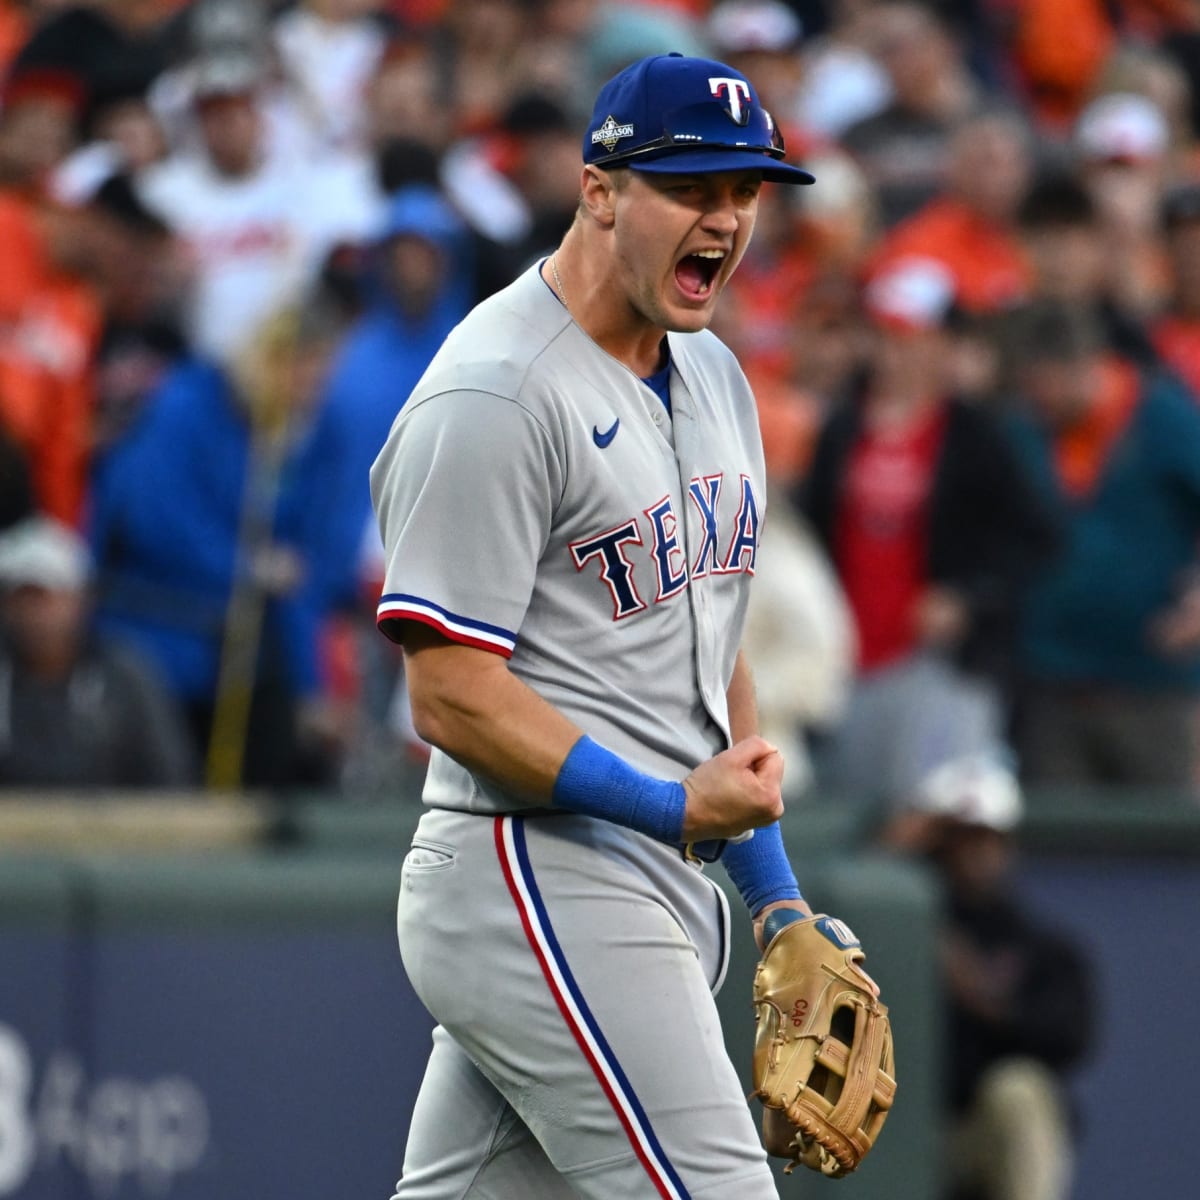 The Athletic loves the Rangers' young players, prospects